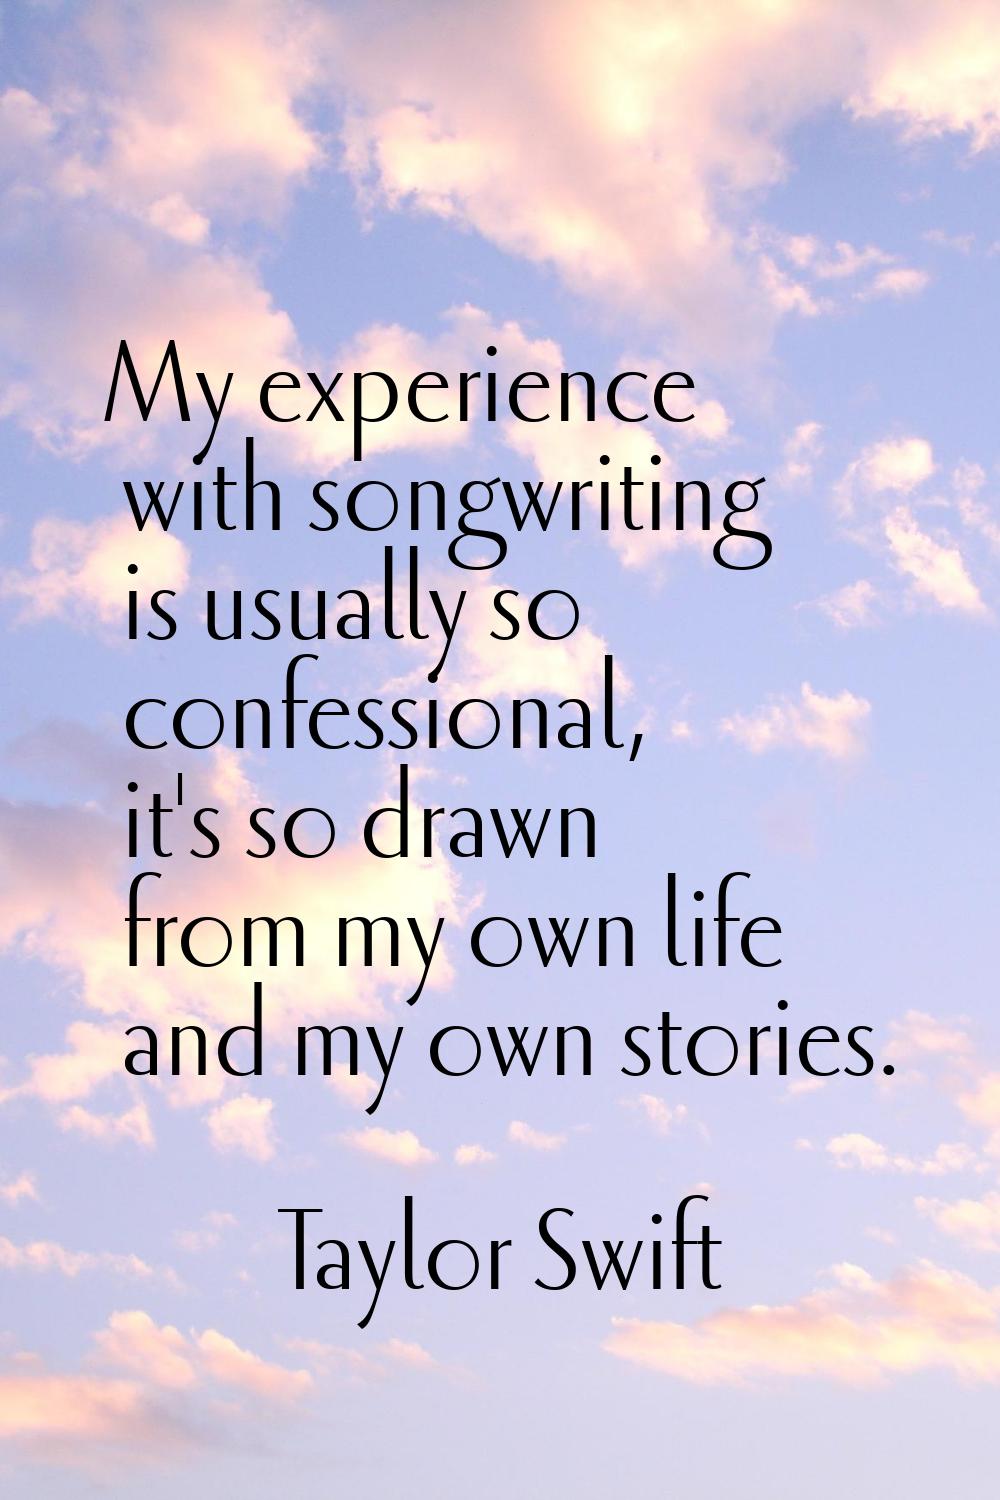 My experience with songwriting is usually so confessional, it's so drawn from my own life and my ow